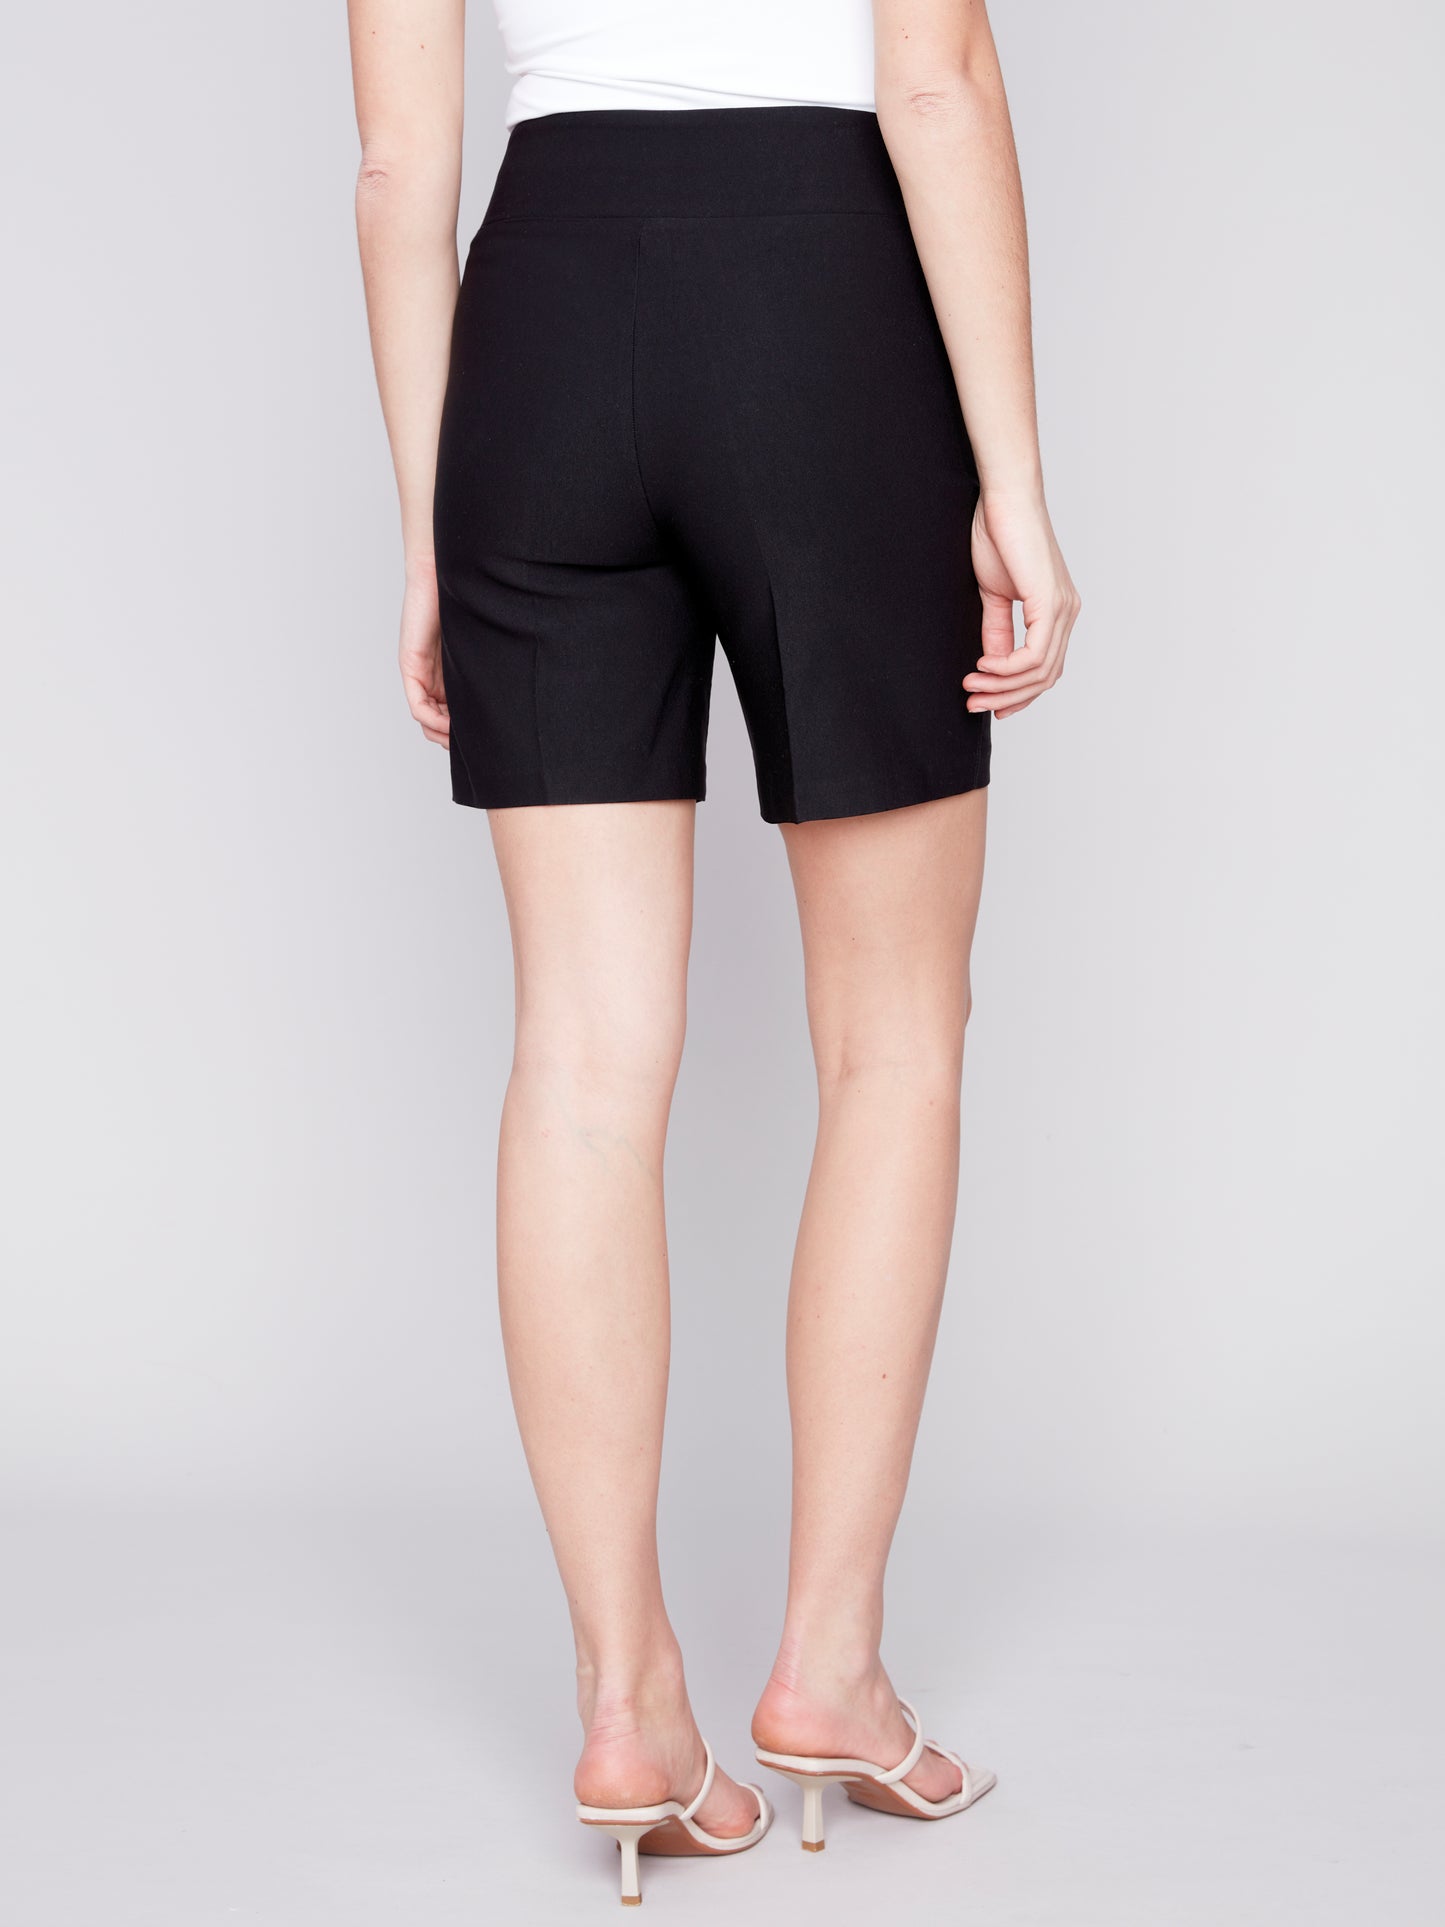 A woman wearing Charlie B smooth stretch shorts in black, paired with a stylish white top, showcasing both comfort and style.